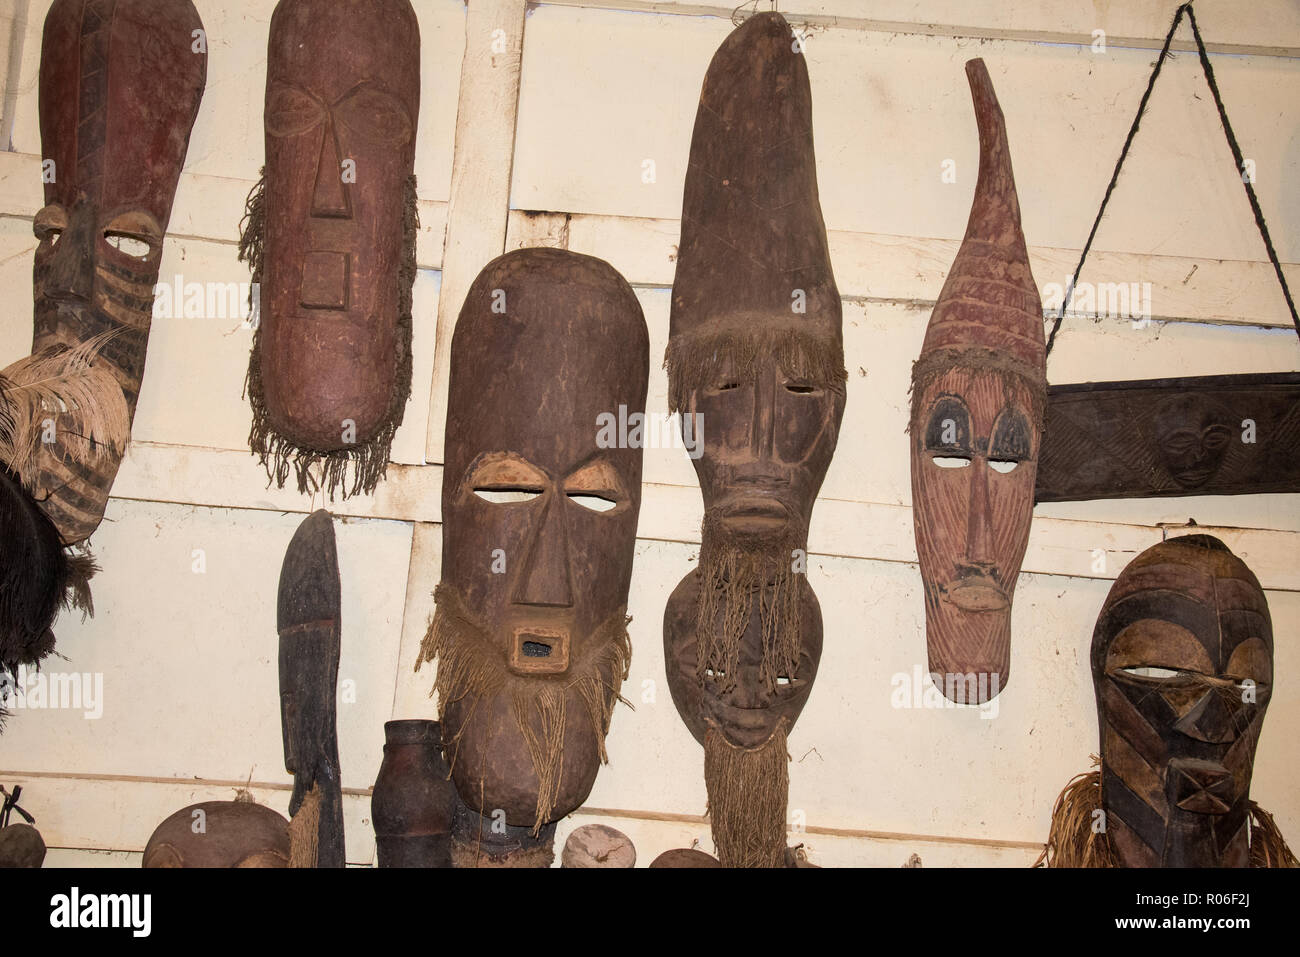 wooden masks in tourists shop in Kenya, Africa Stock Photo